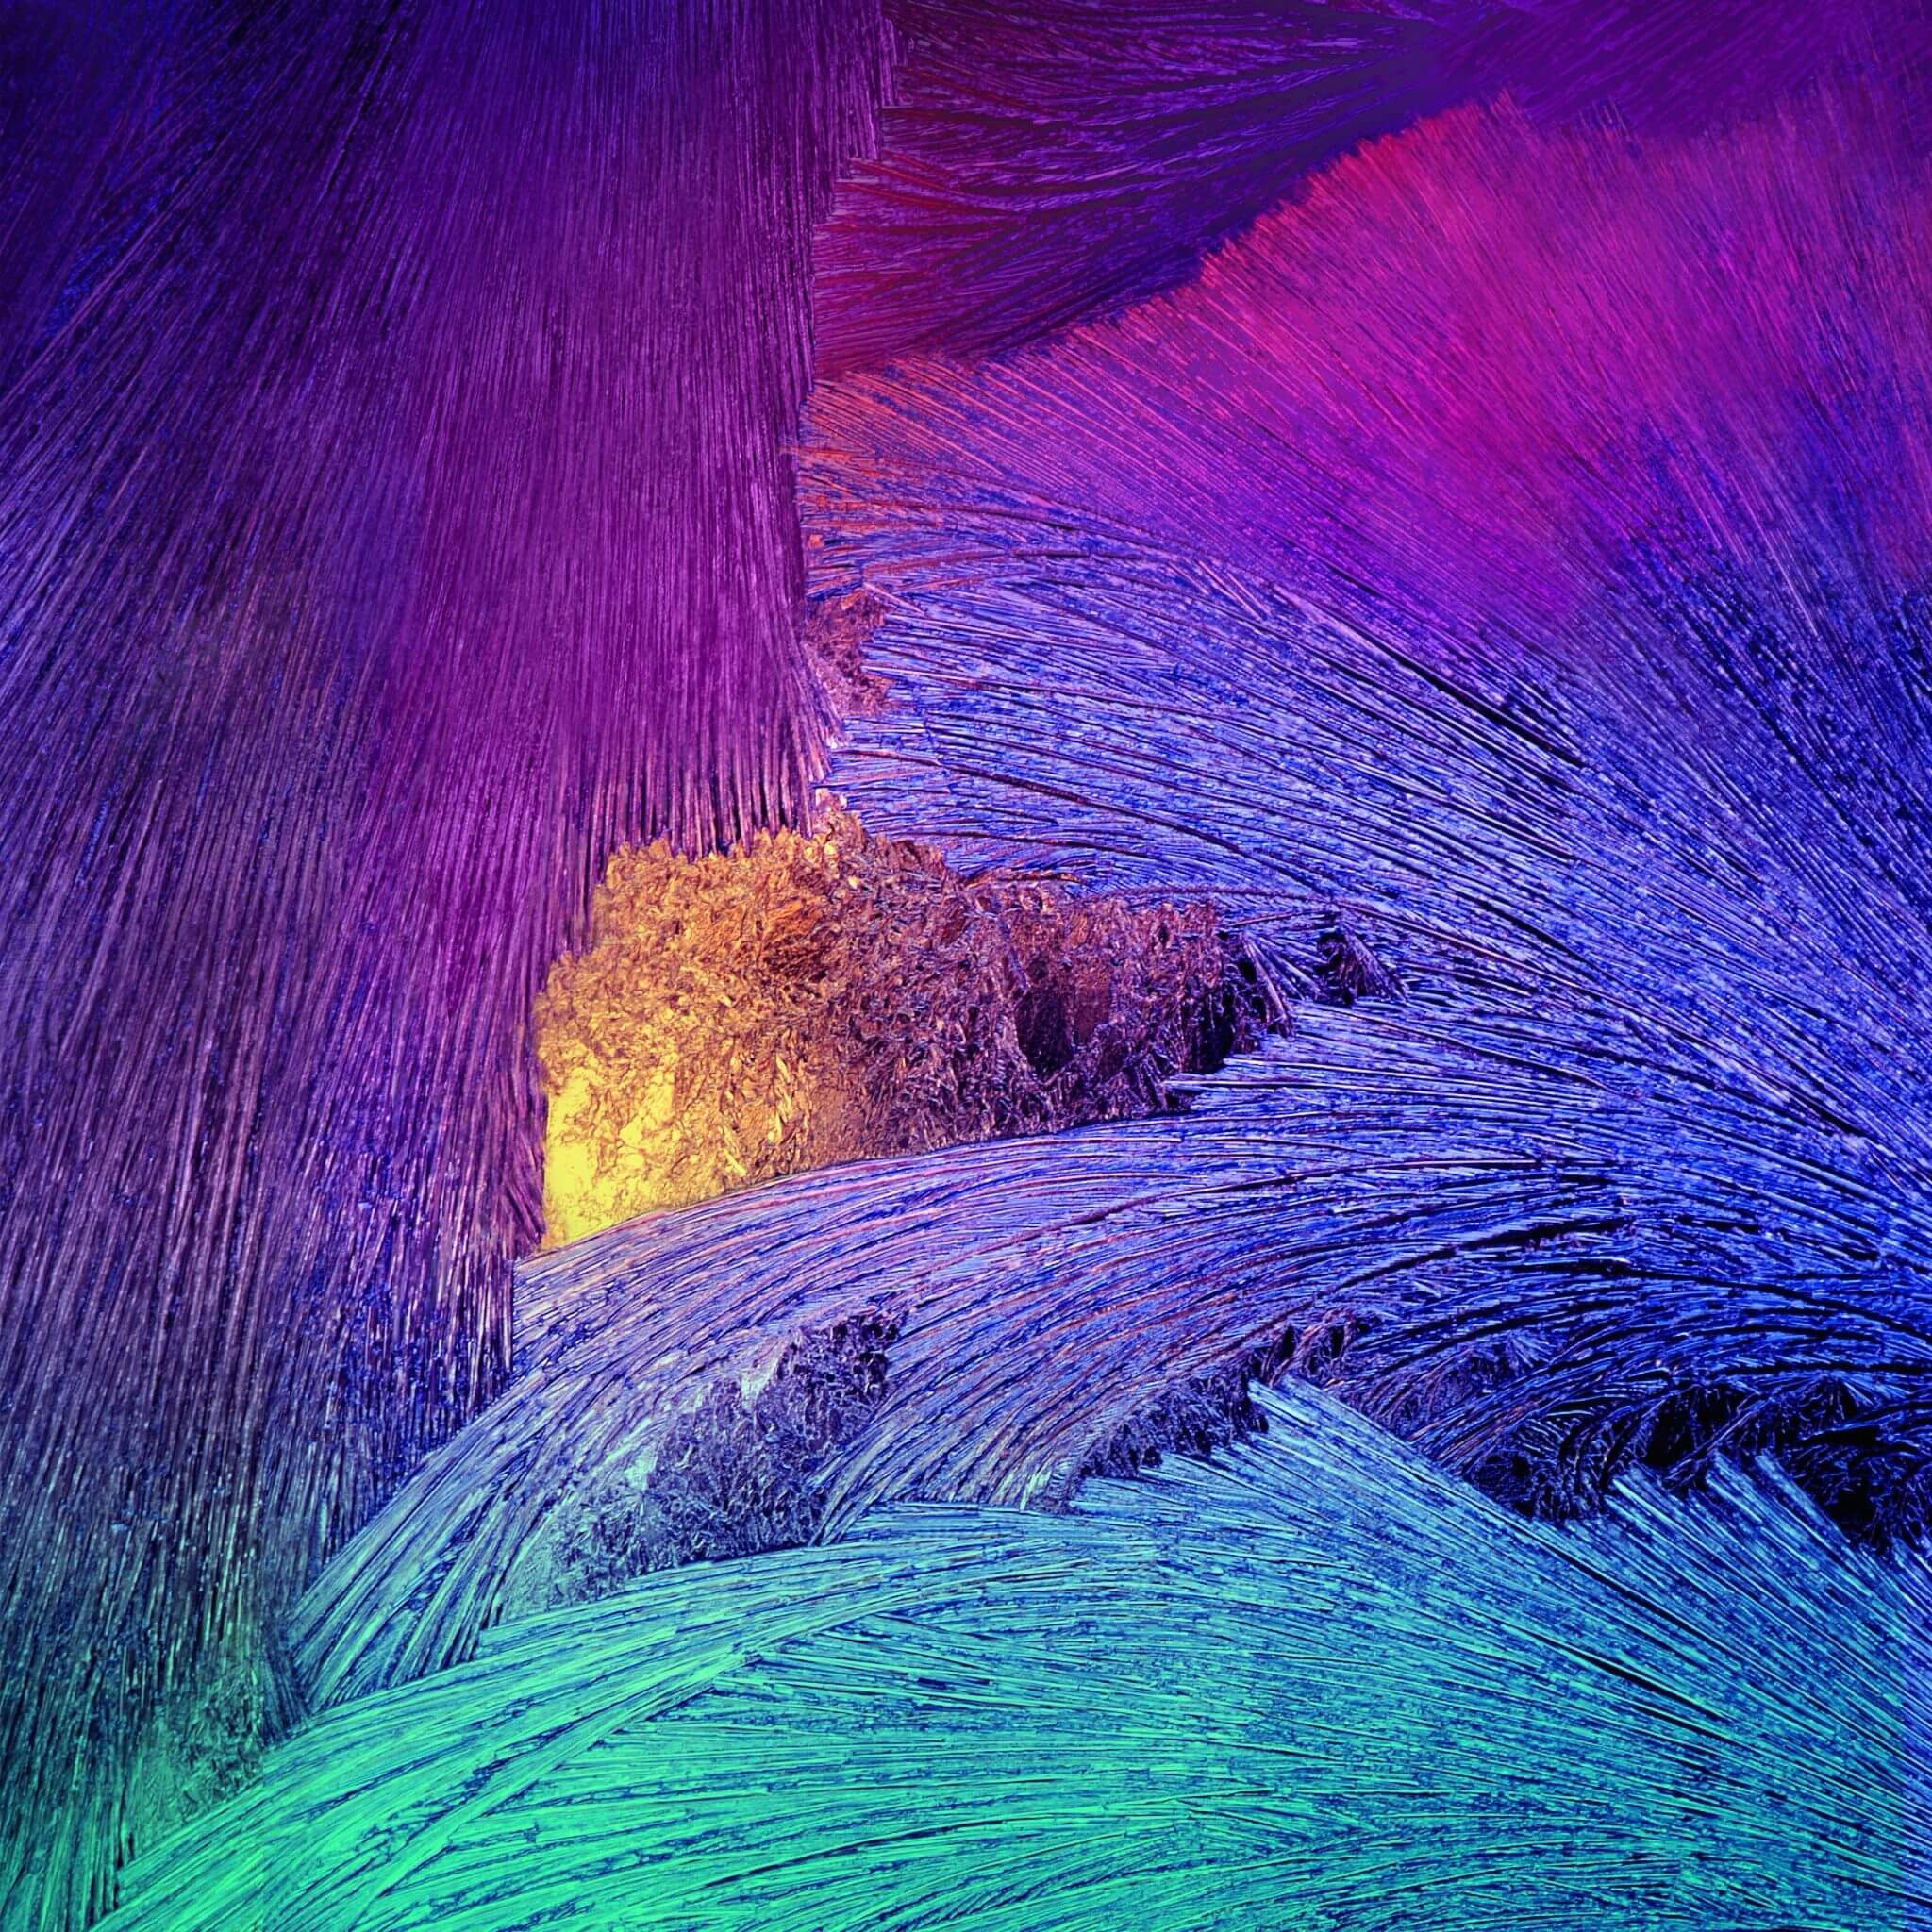 Mobile :hones Shop: 6 wallpaper Galaxy Note 4 for iPhone iPhone and iPad 6 Plus